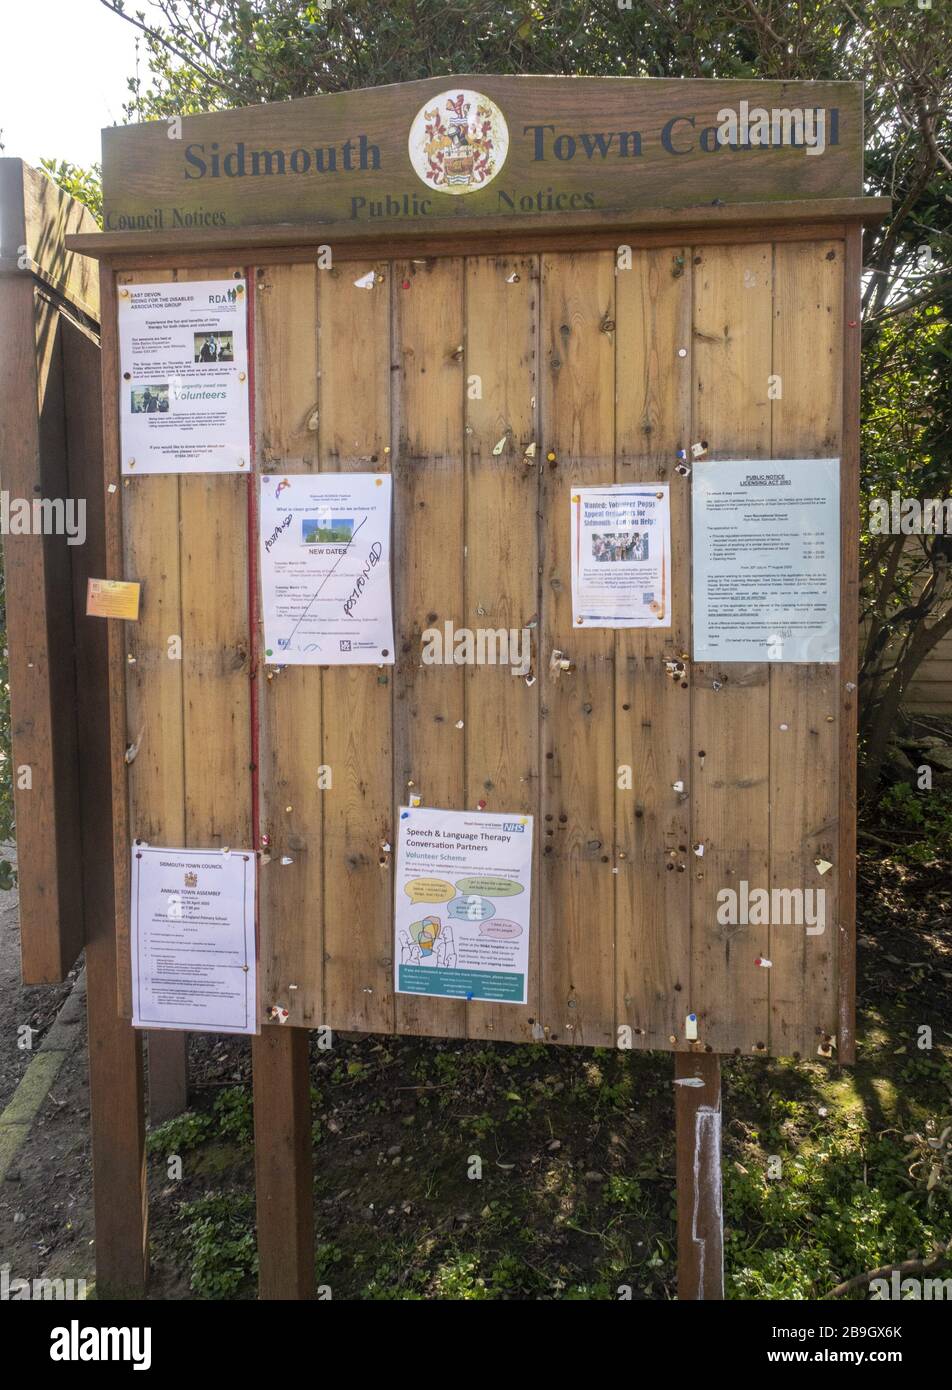 Sidmouth, Devon, 24th March 2020 Empty notice boards in Sidmouth, Devon, ass all events are cancelled following the coronavirus pandemic. Credit: Photo Central/Alamy Live News Stock Photo